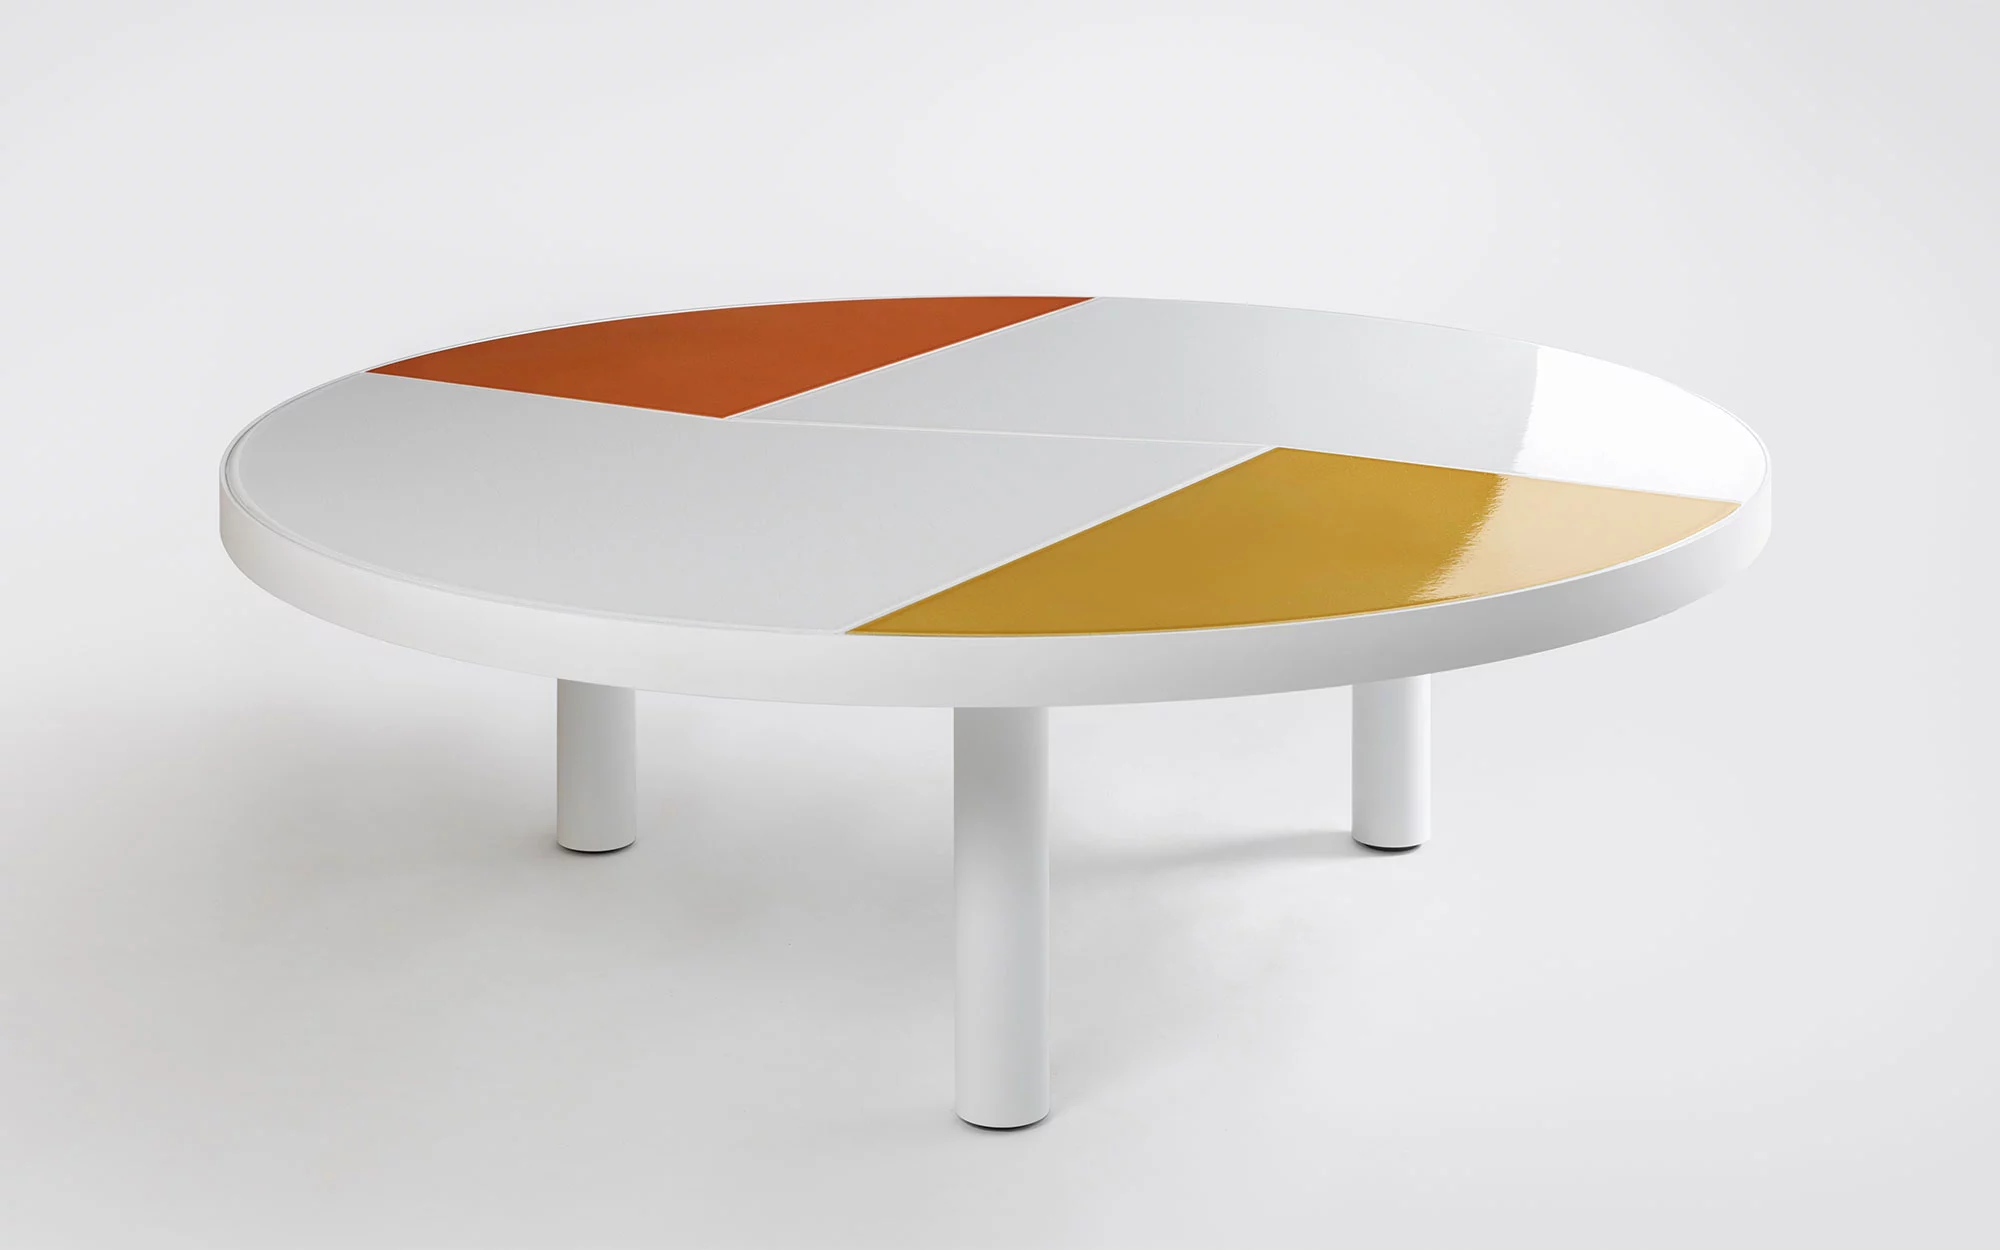 Fraction Coffee Table - Pierre Charpin - Bench - Galerie kreo